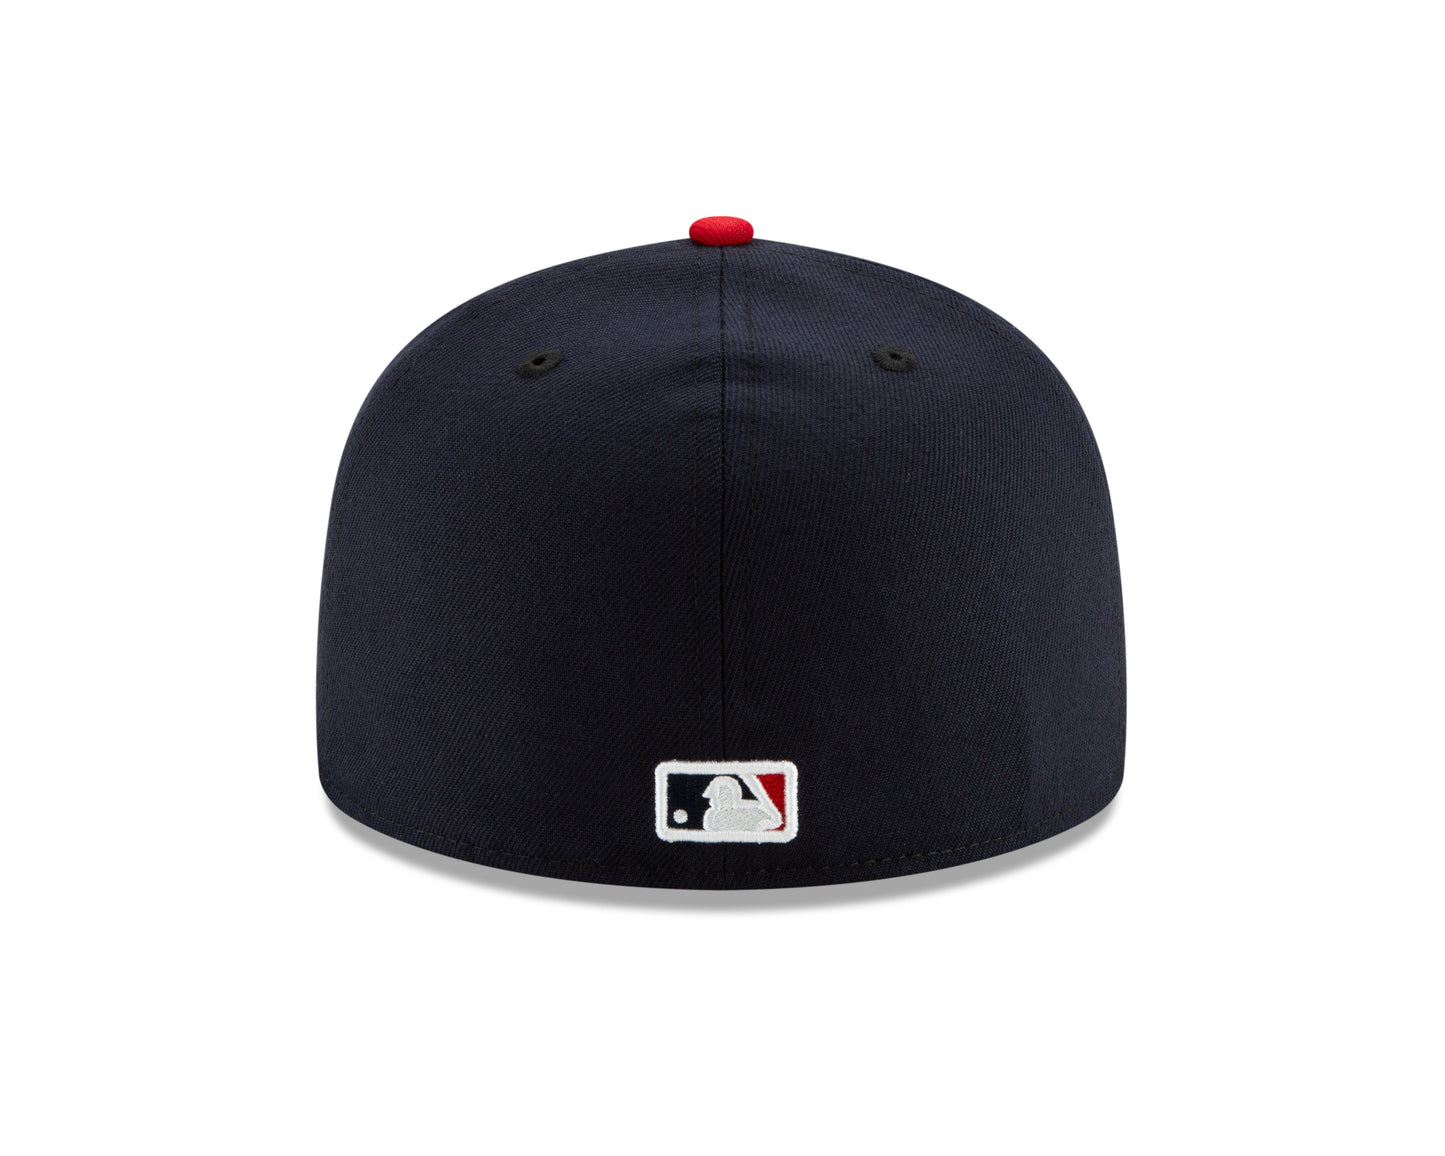 St. Louis Cardinals MLB Authentic Collections Performance Alt. 59FIFTY Hat - Navy